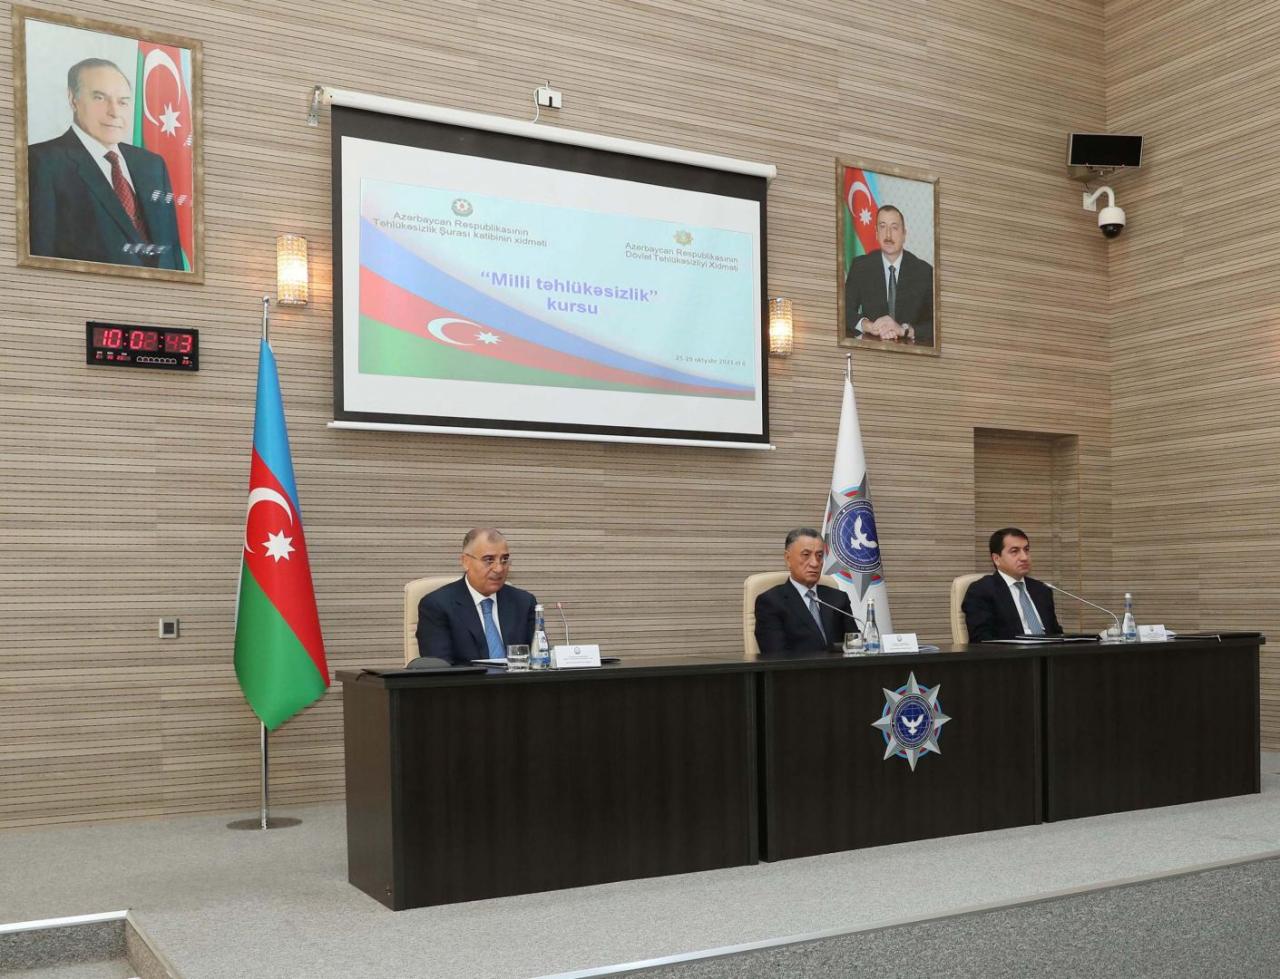 Azerbaijan's International Anti-Terrorism Training Center holds opening ceremony for "National Security" course [PHOTO]